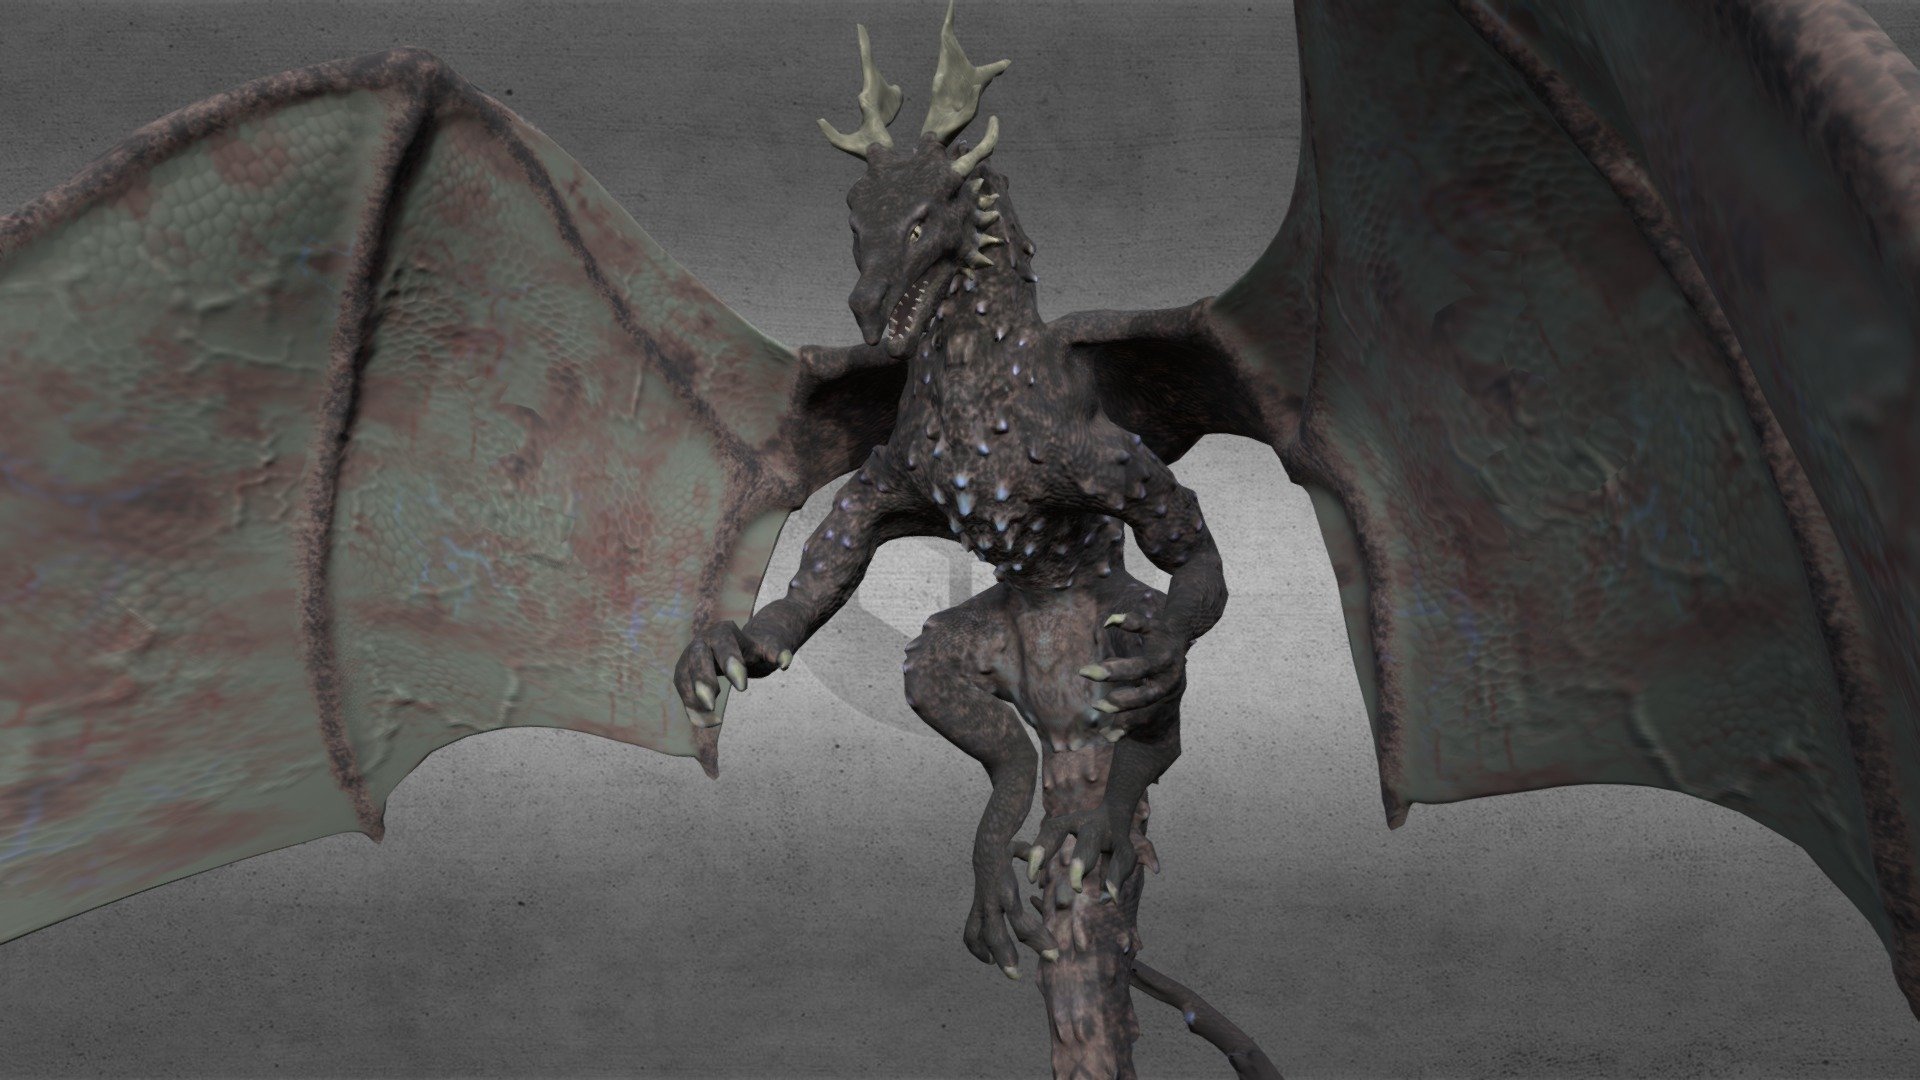 The European Dragon (FBX) model  is Game Ready, with the following animations:
- Idle Stand
- Idle Sit
- Walk
- Run
- Fly

The model consists of 5 parts (main body, two eyes, upper and bottom teeth) and comes with 2k &amp; 4k textures (hand painted).

This model is free under the CC Attribution license.
If you download this model, know that all feedback is welcome and very much appreciated!
(If you find any trouble using this model, please let me know) 3d model